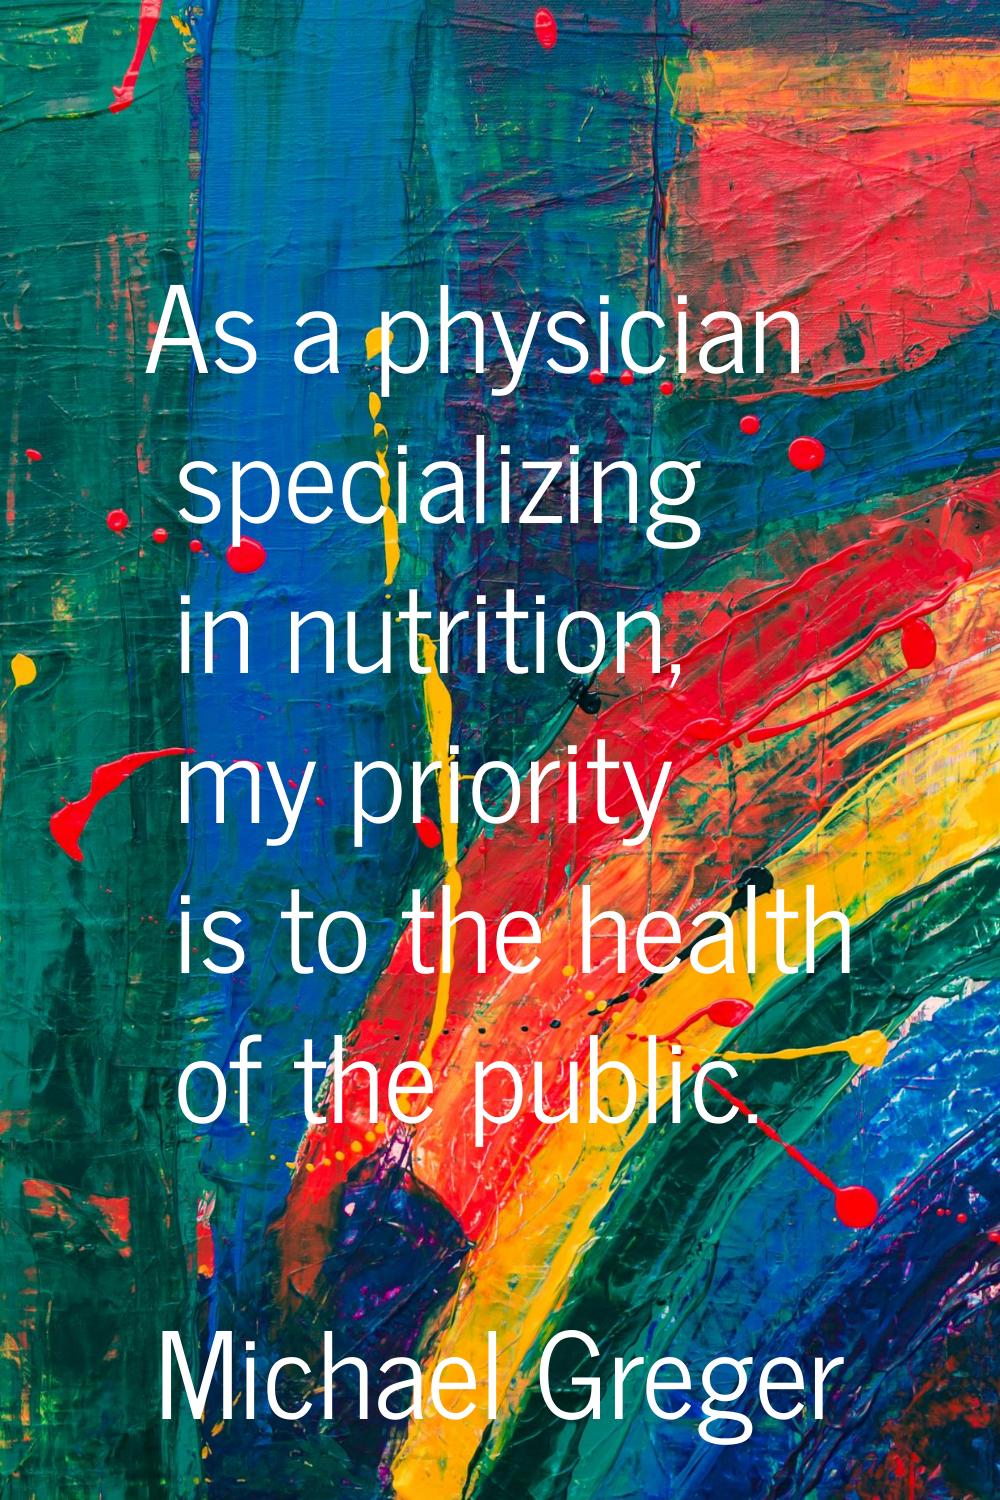 As a physician specializing in nutrition, my priority is to the health of the public.